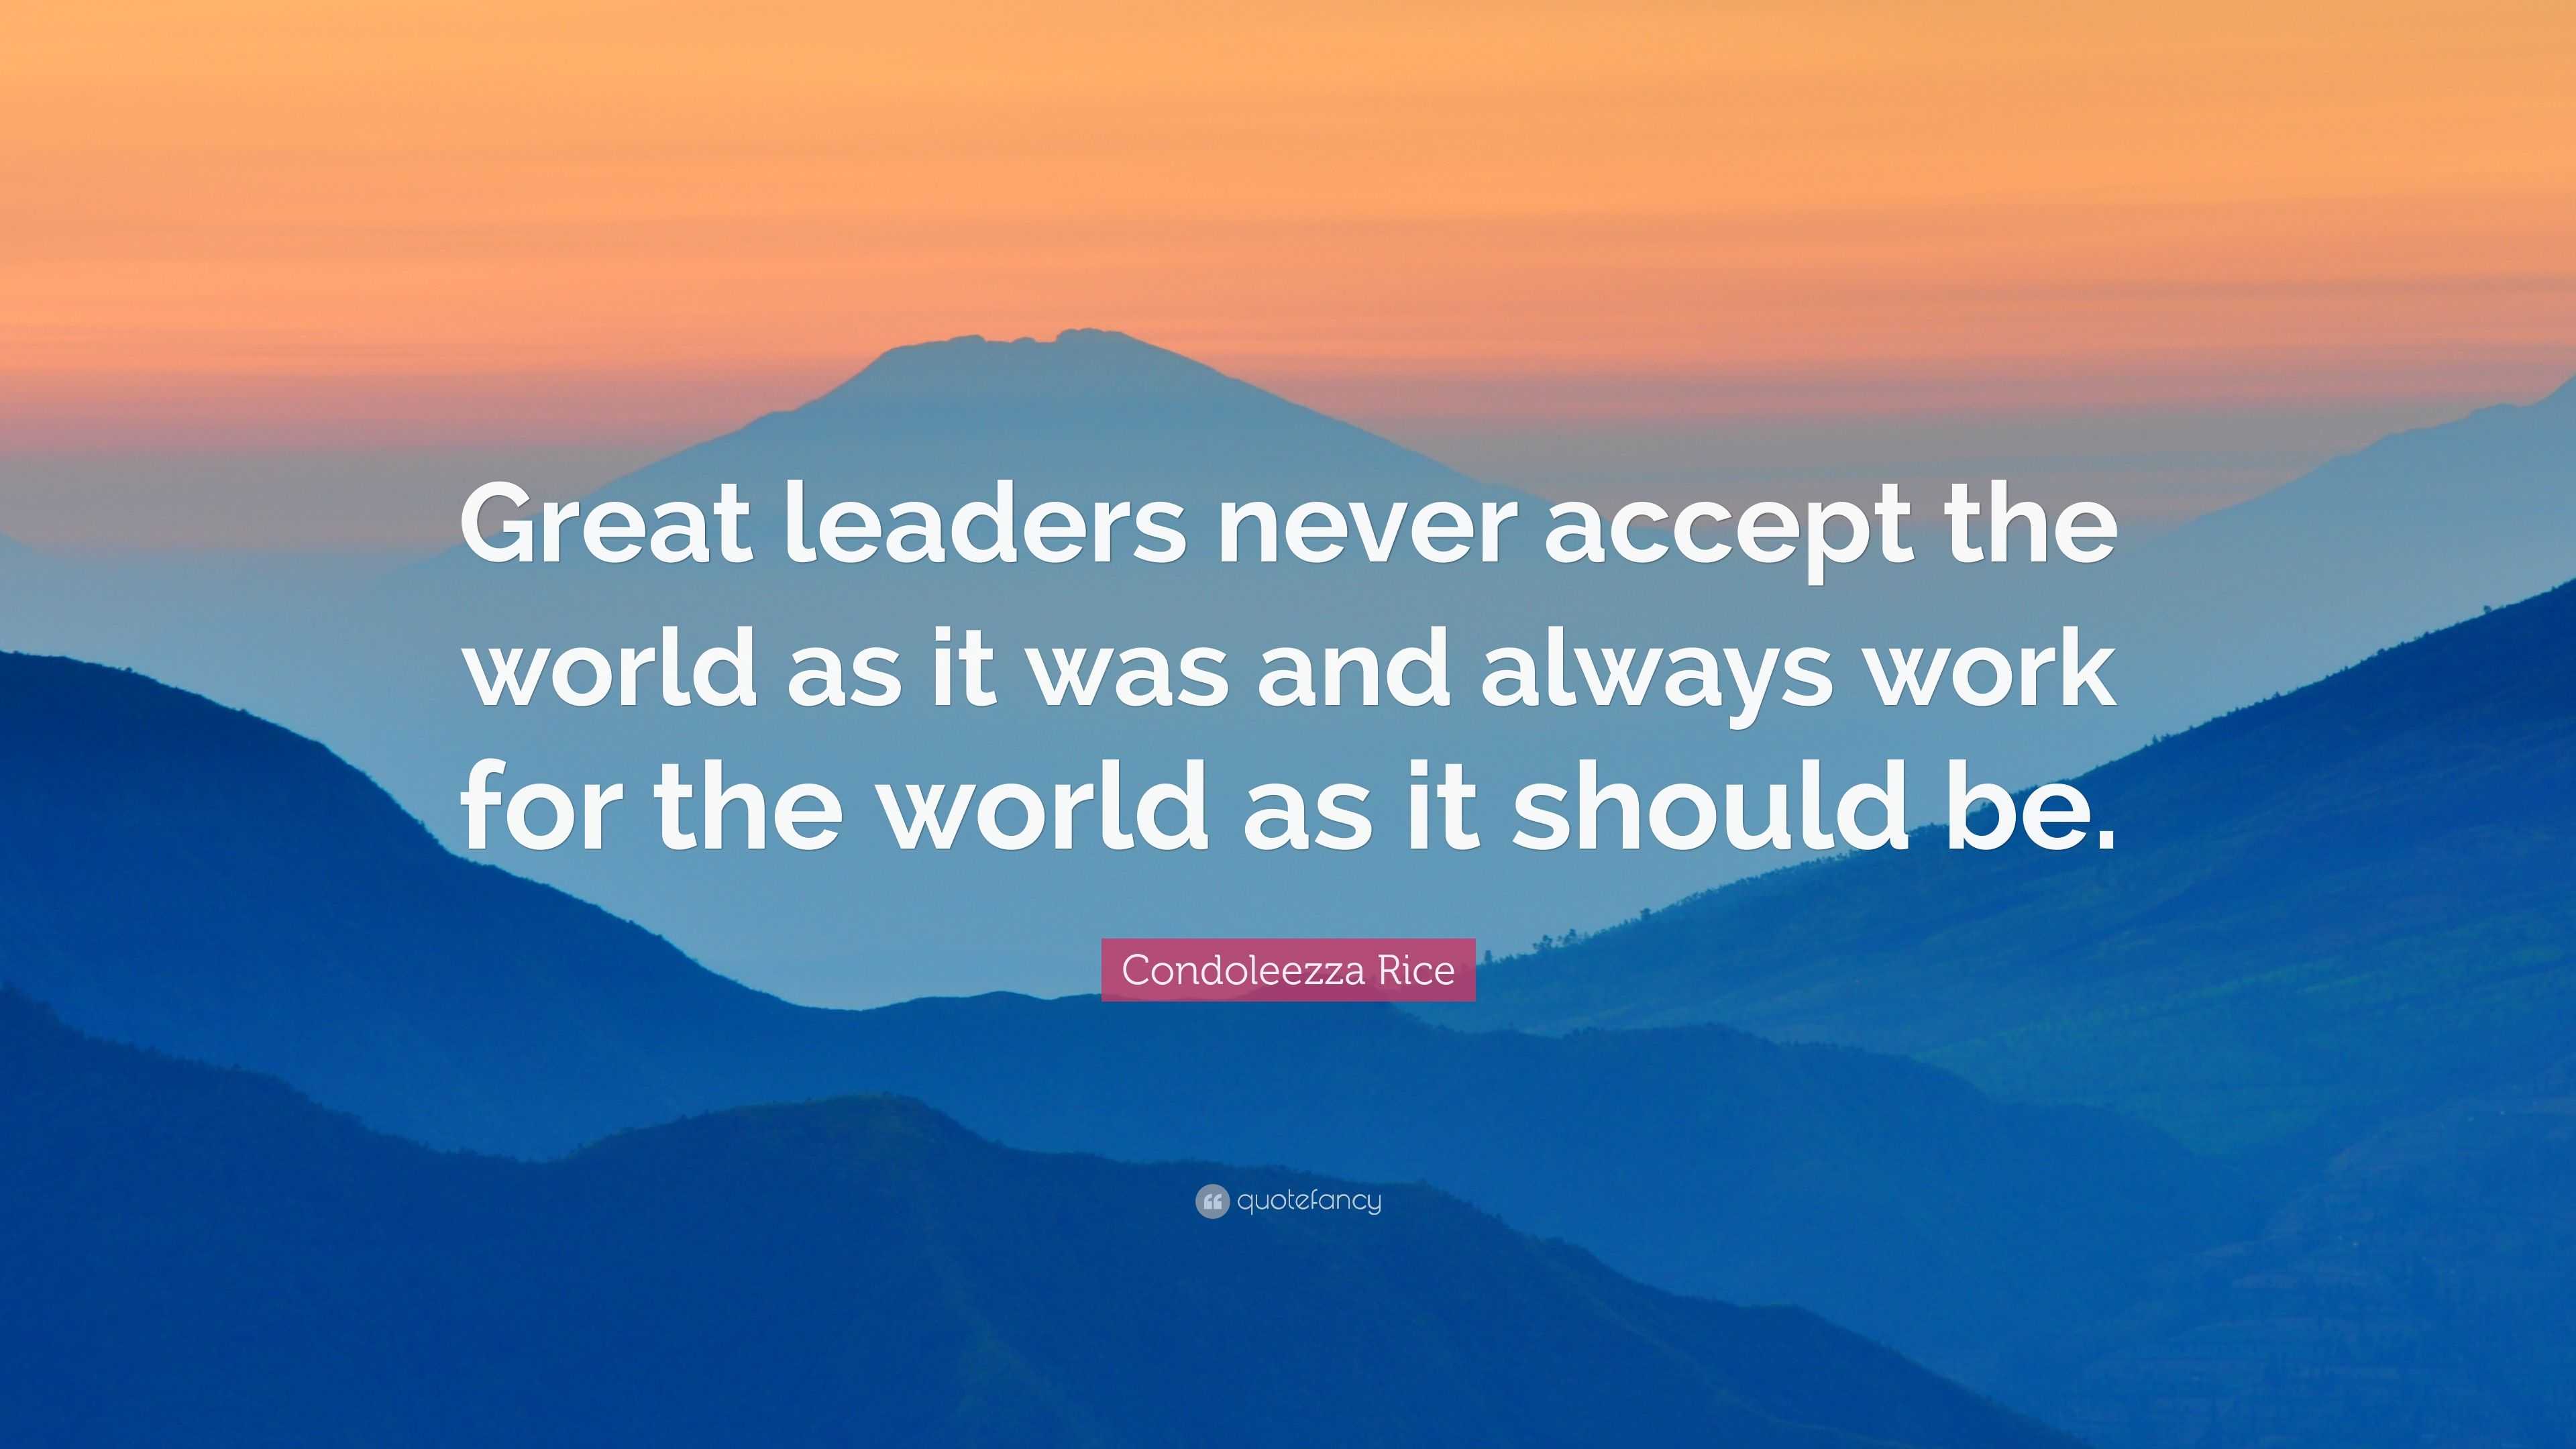 Condoleezza Rice Quote: "Great leaders never accept the world as it was and always work for the ...